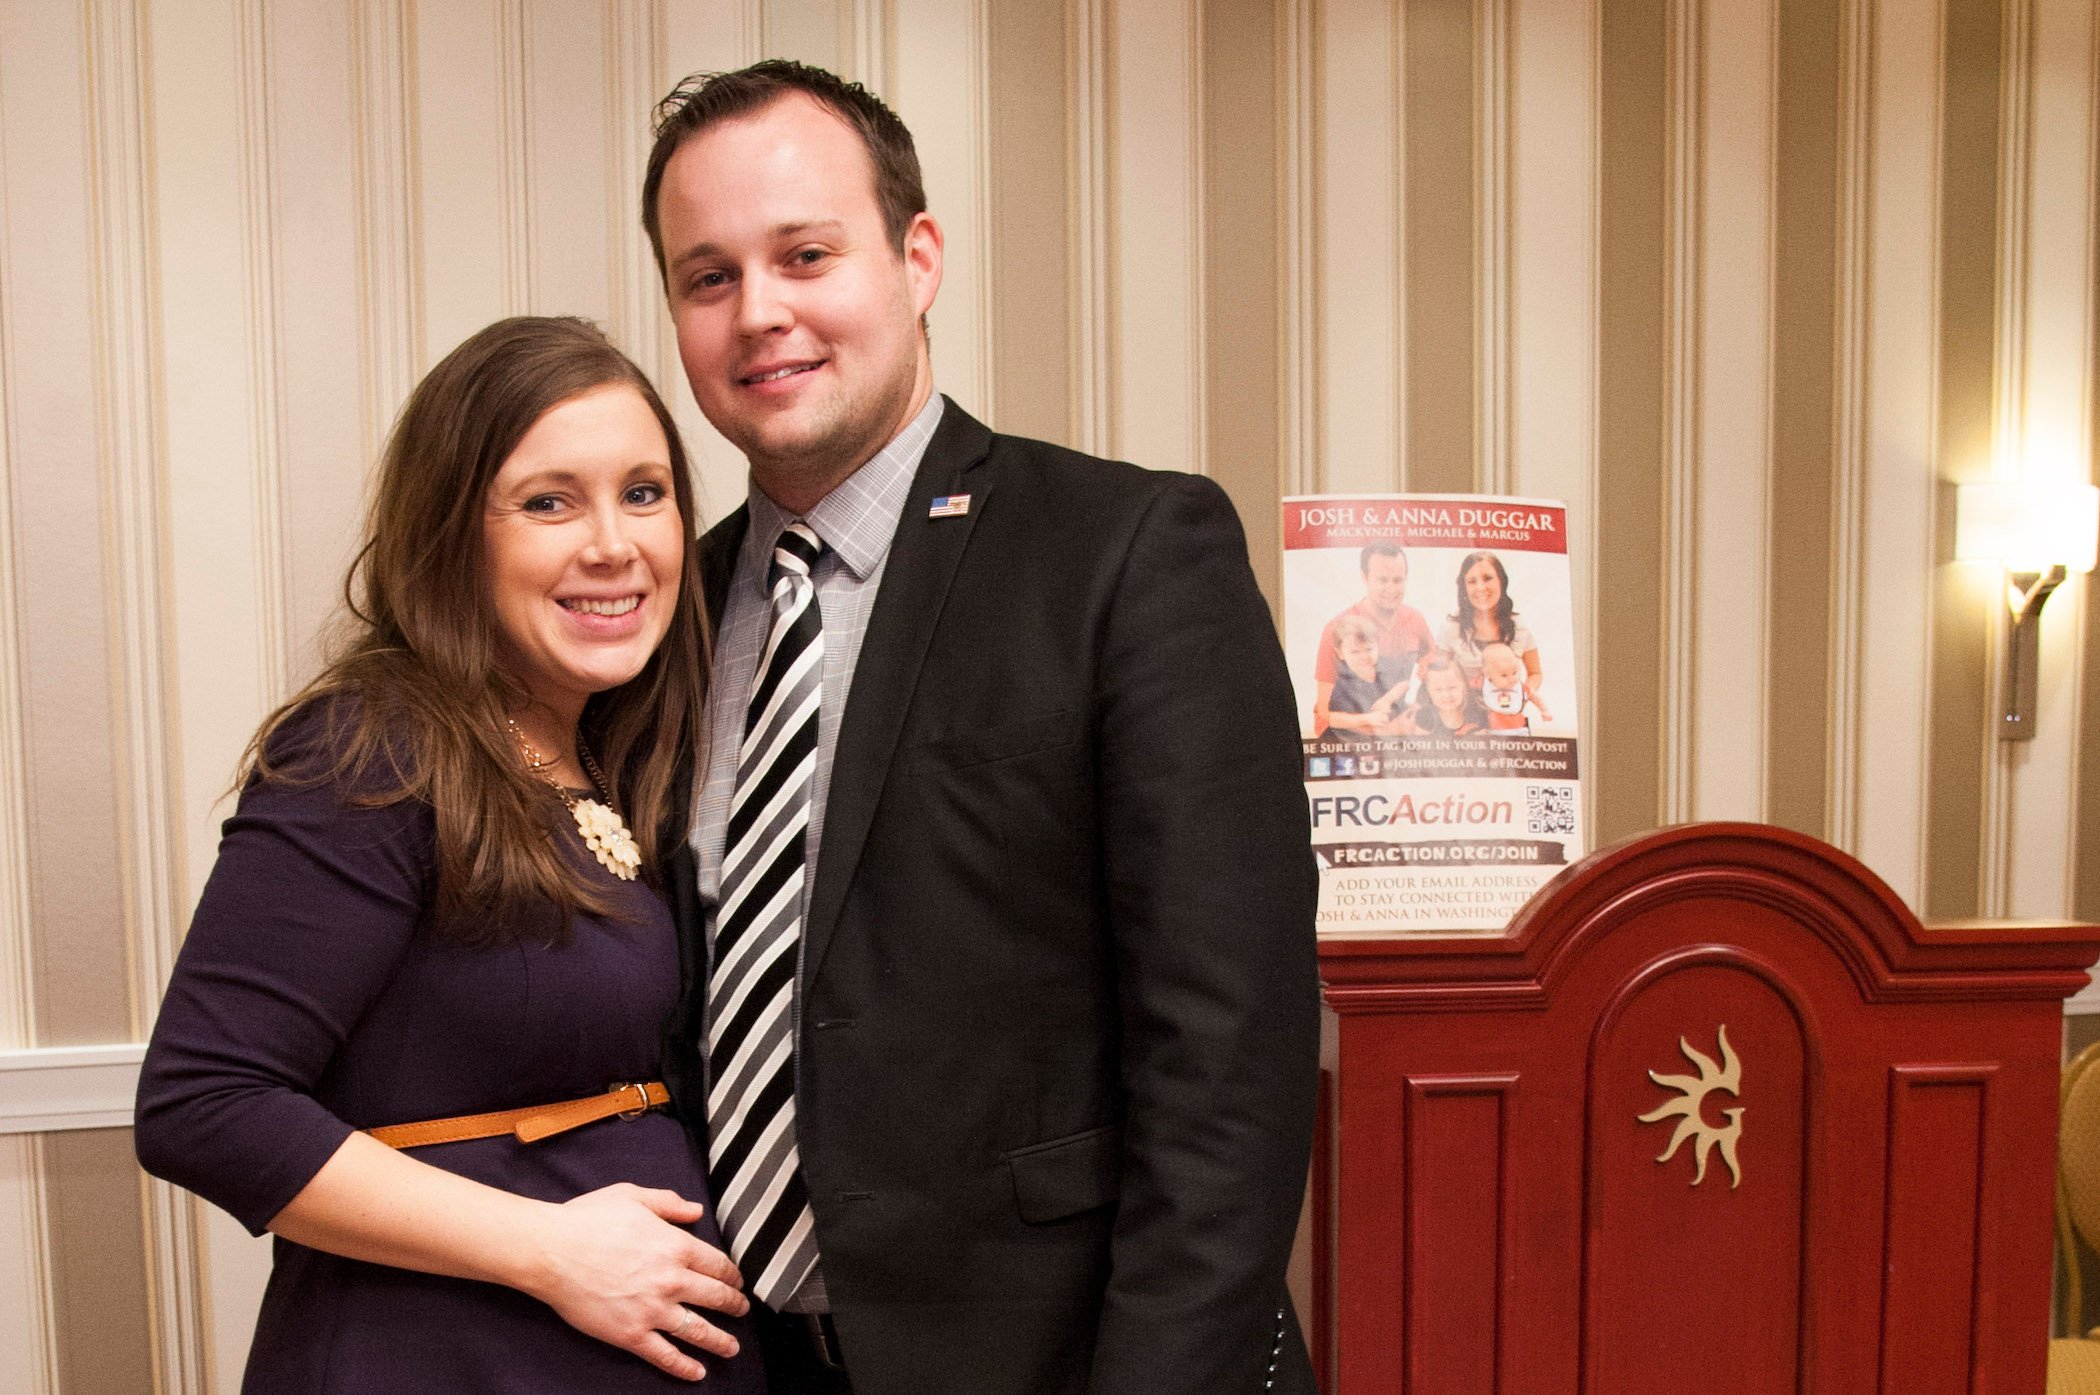 Anna Duggar and Josh Duggar smiling and posing together during a convention. Josh Duggar news notes Anna Duggar continues to stick by his side through the arrest.